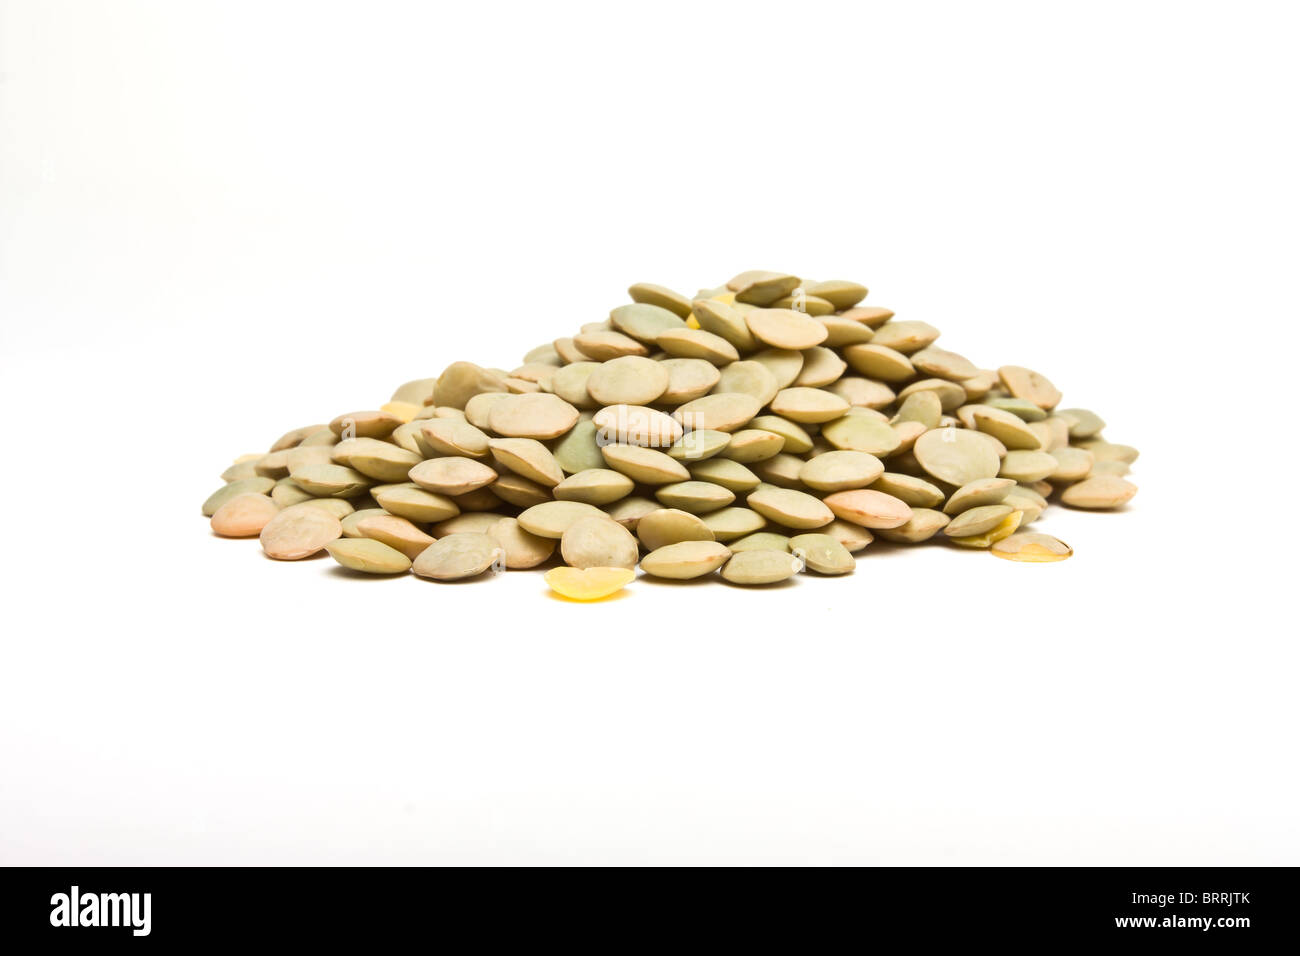 Pile of green lentils from low perspective isolated on white. Stock Photo